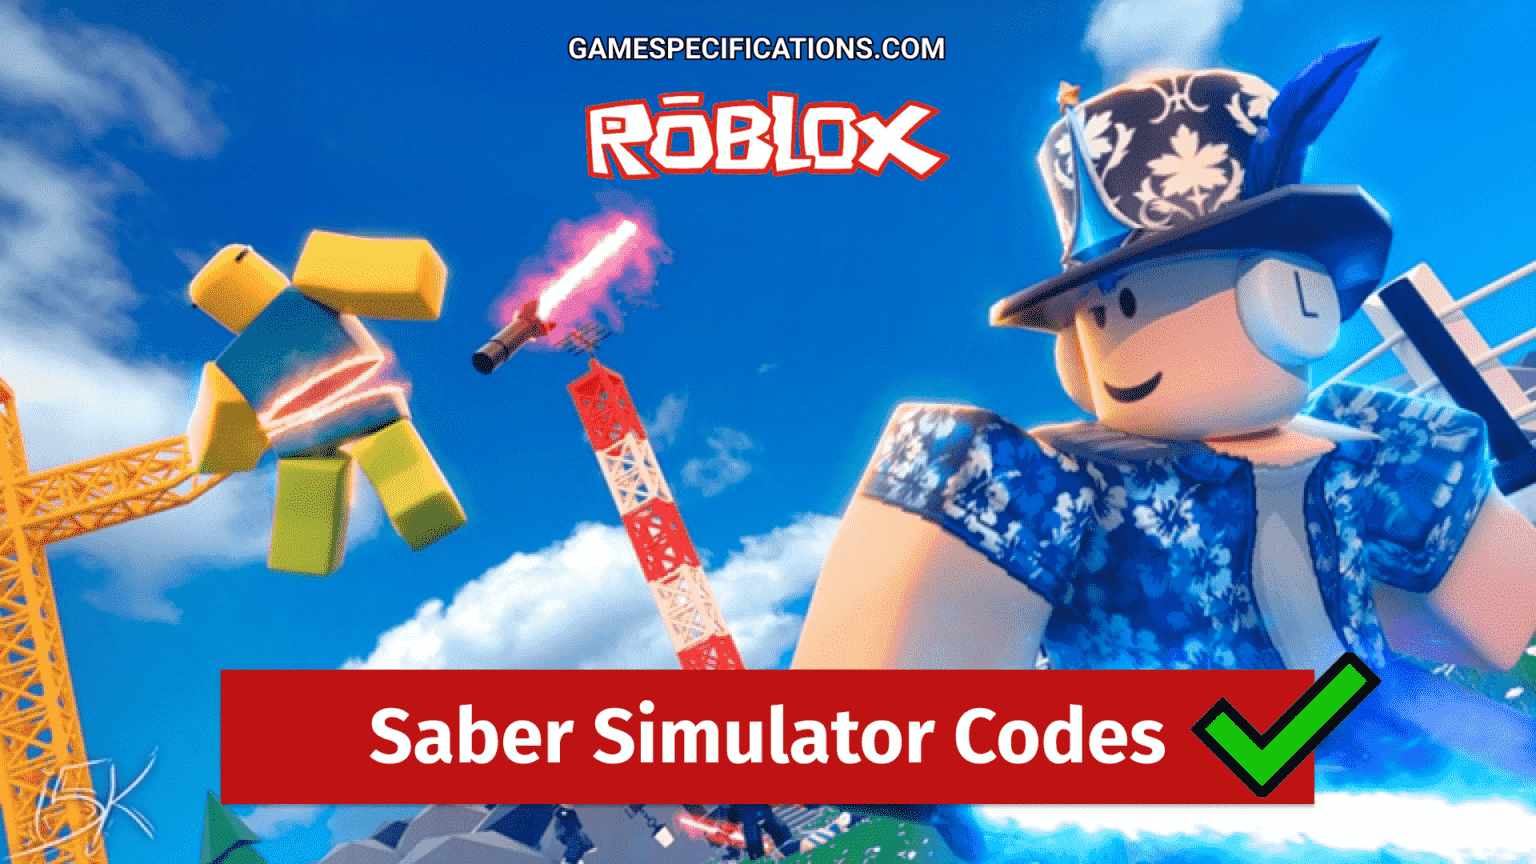 39-roblox-saber-simulator-codes-to-get-free-rewards-june-2023-game-specifications